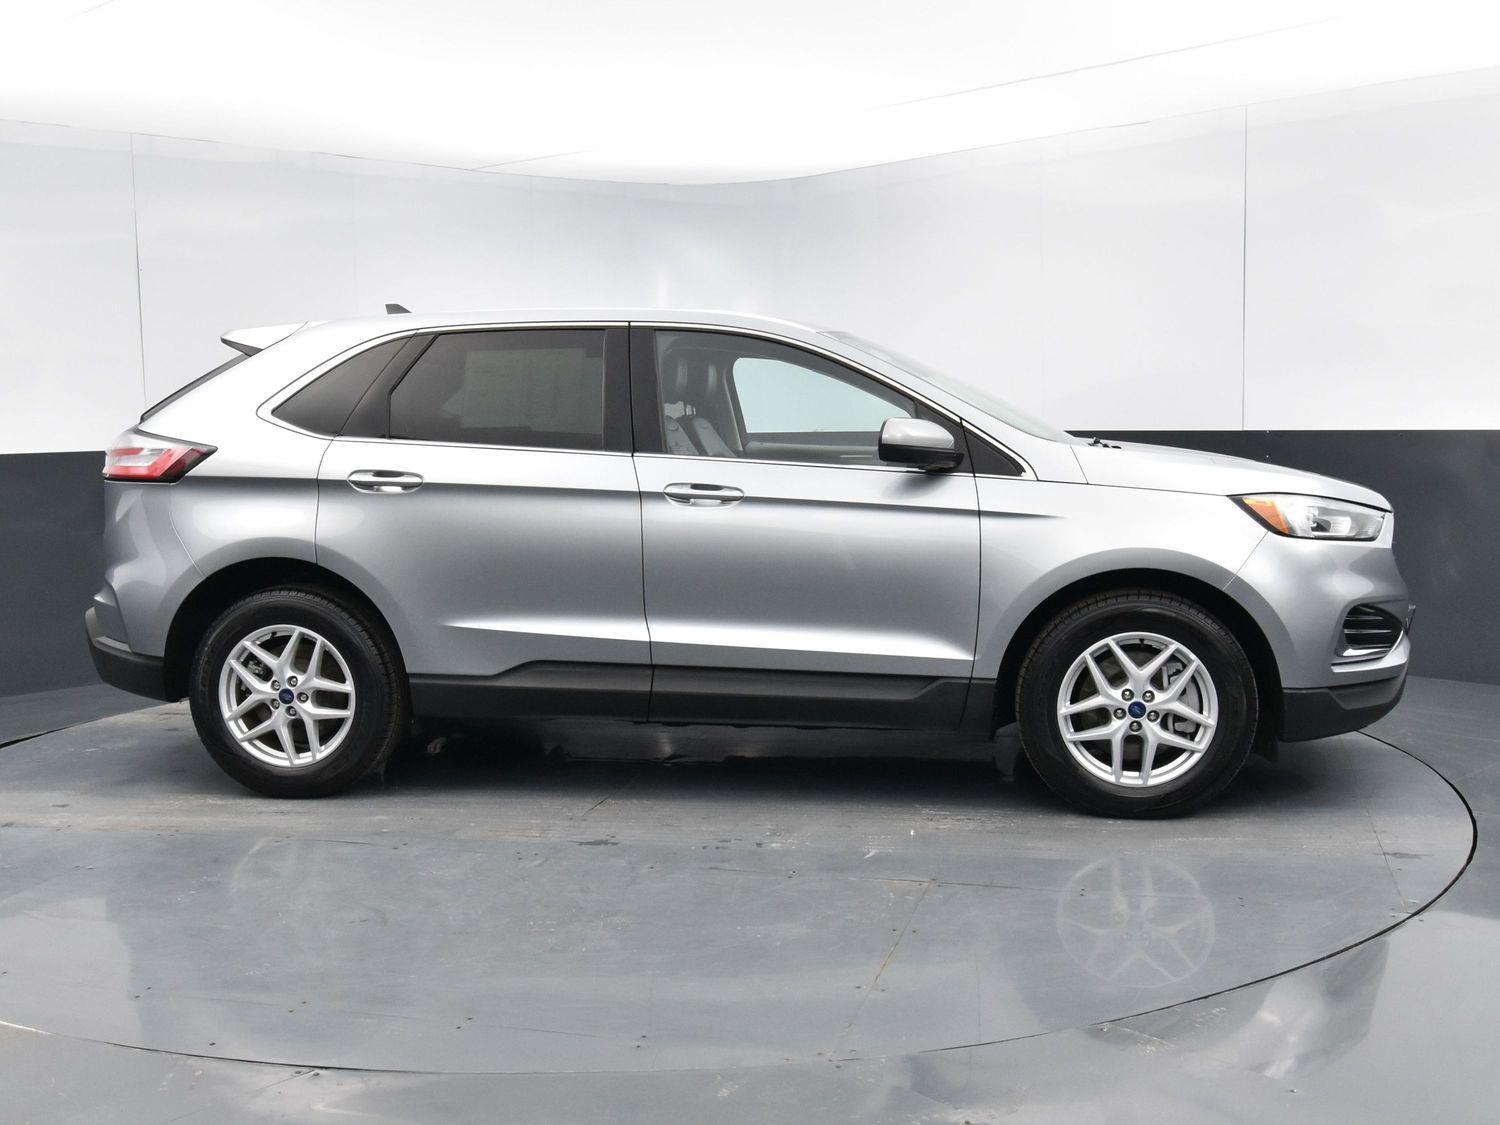 Used 2022 Ford Edge SEL Sport Utility for sale in Grand Island NE